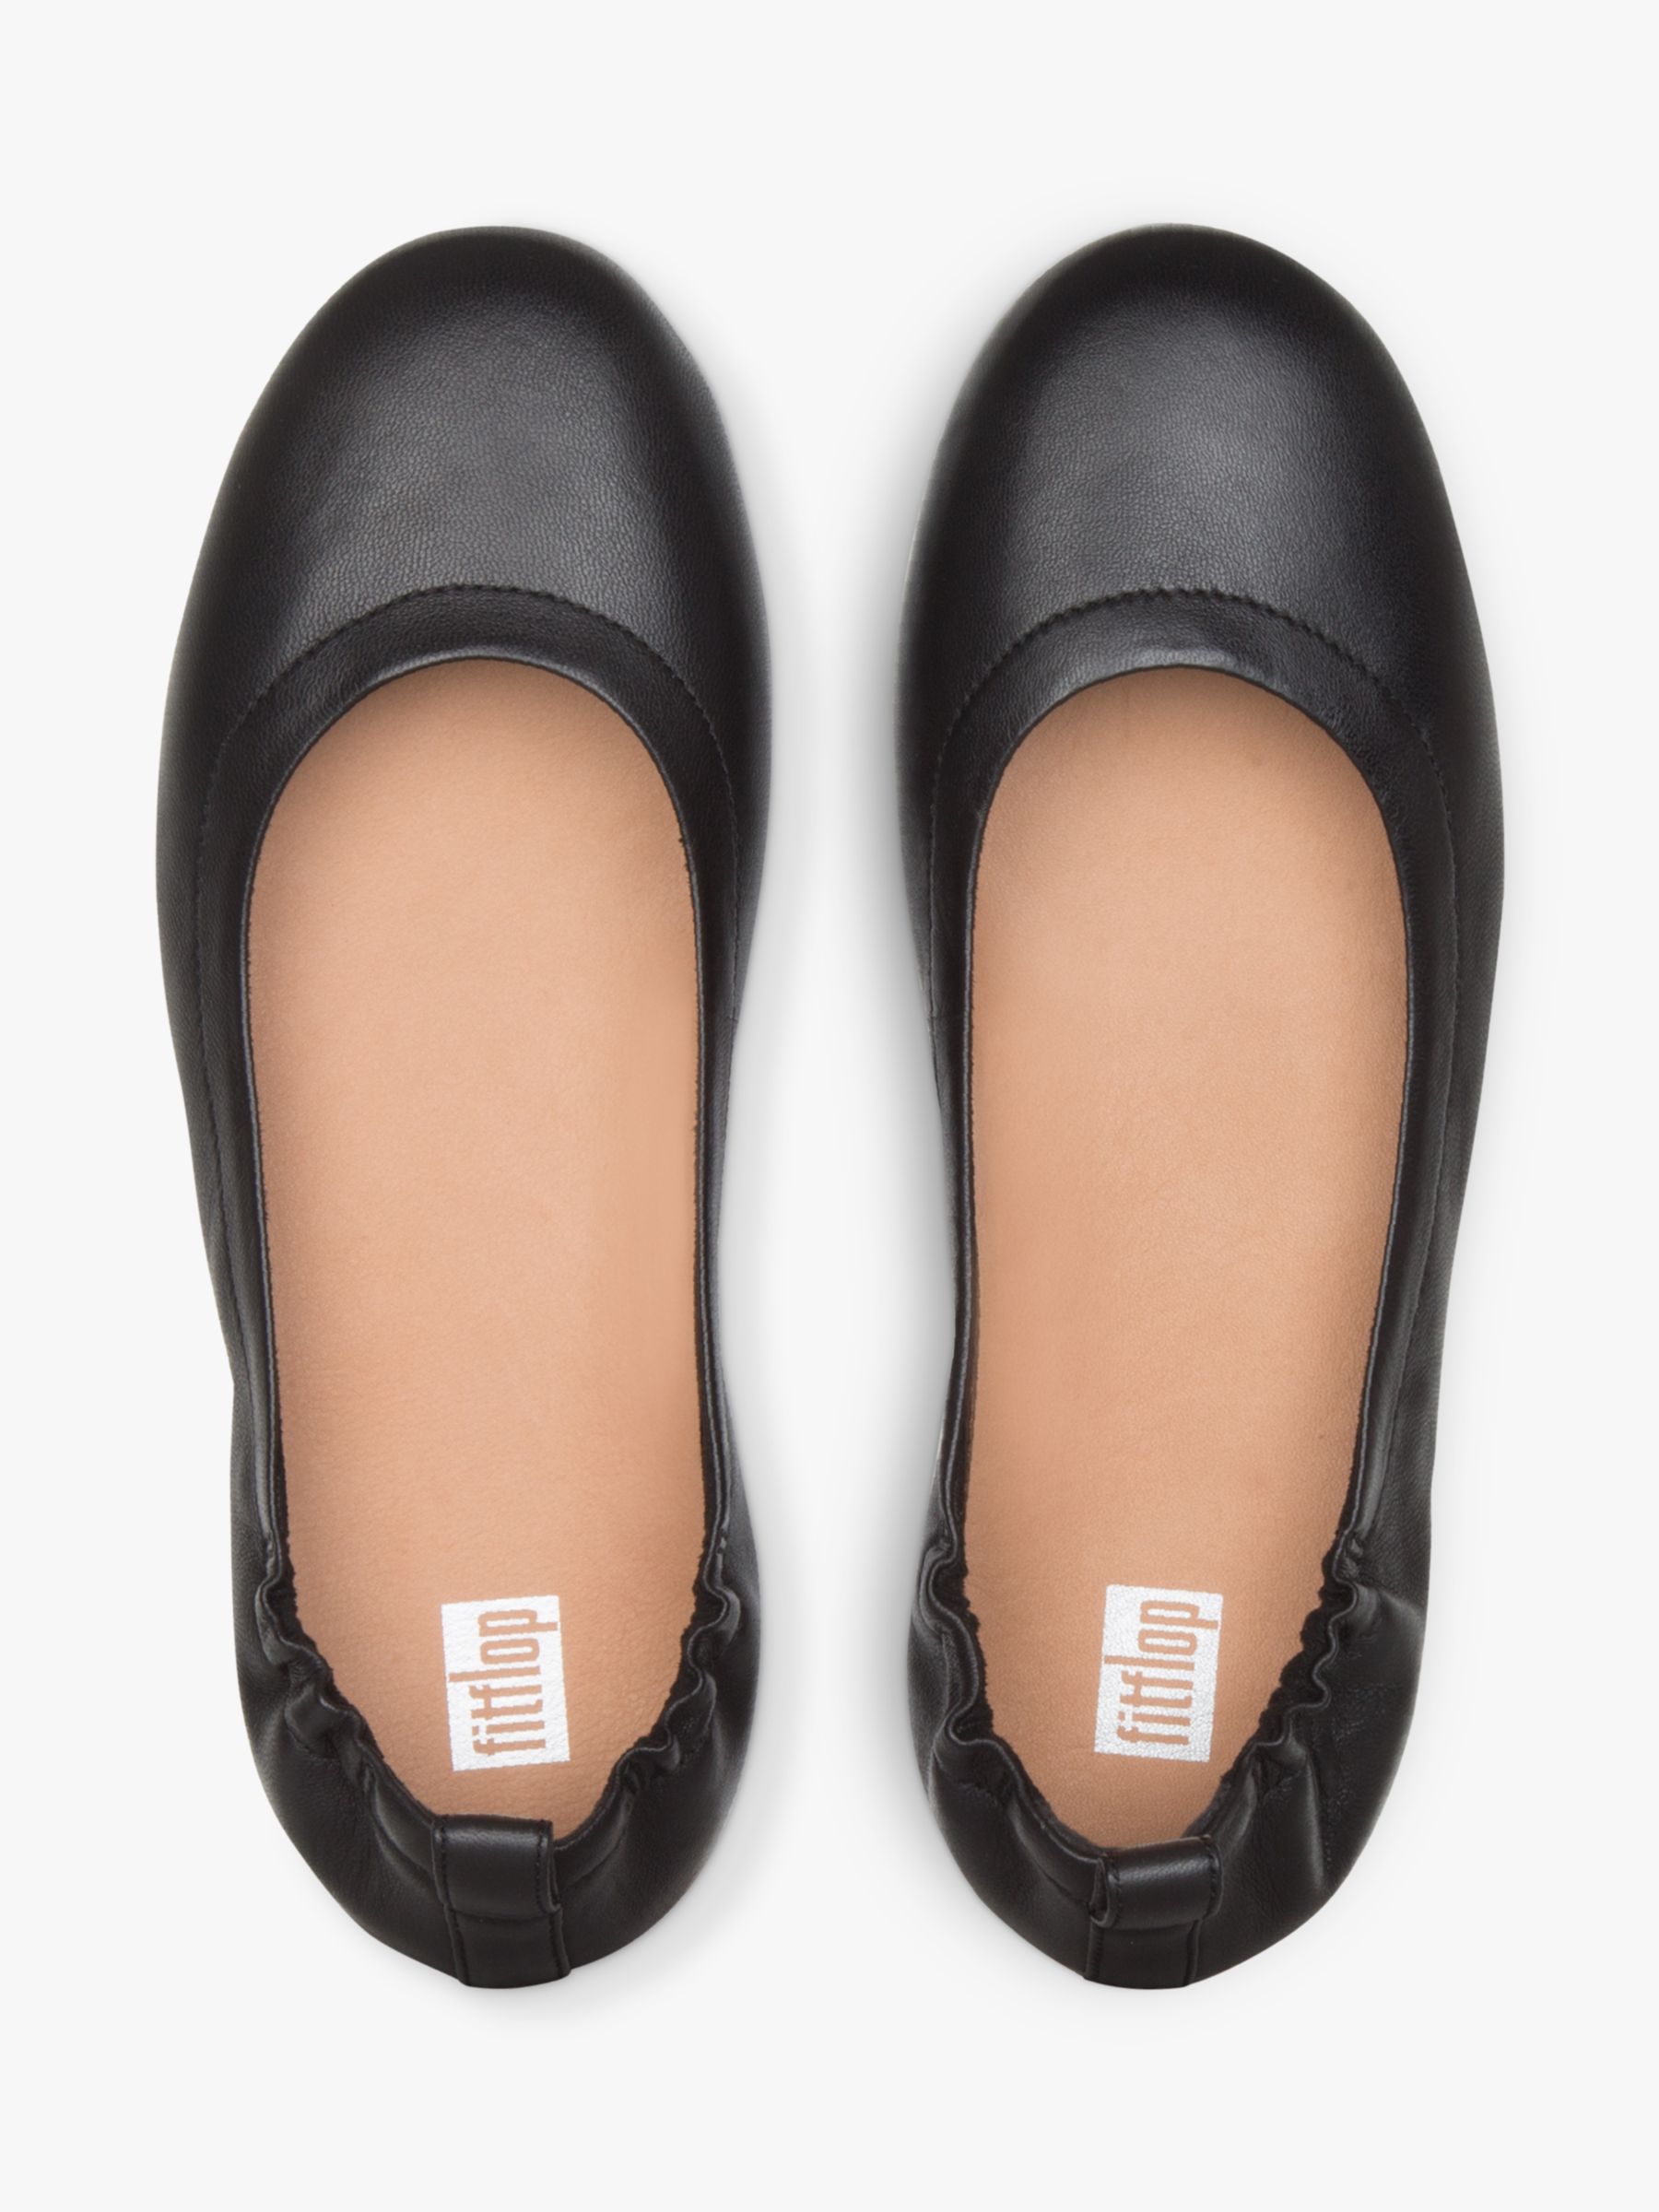 FitFlop Allegro Flat Leather Pumps, Black at John & Partners